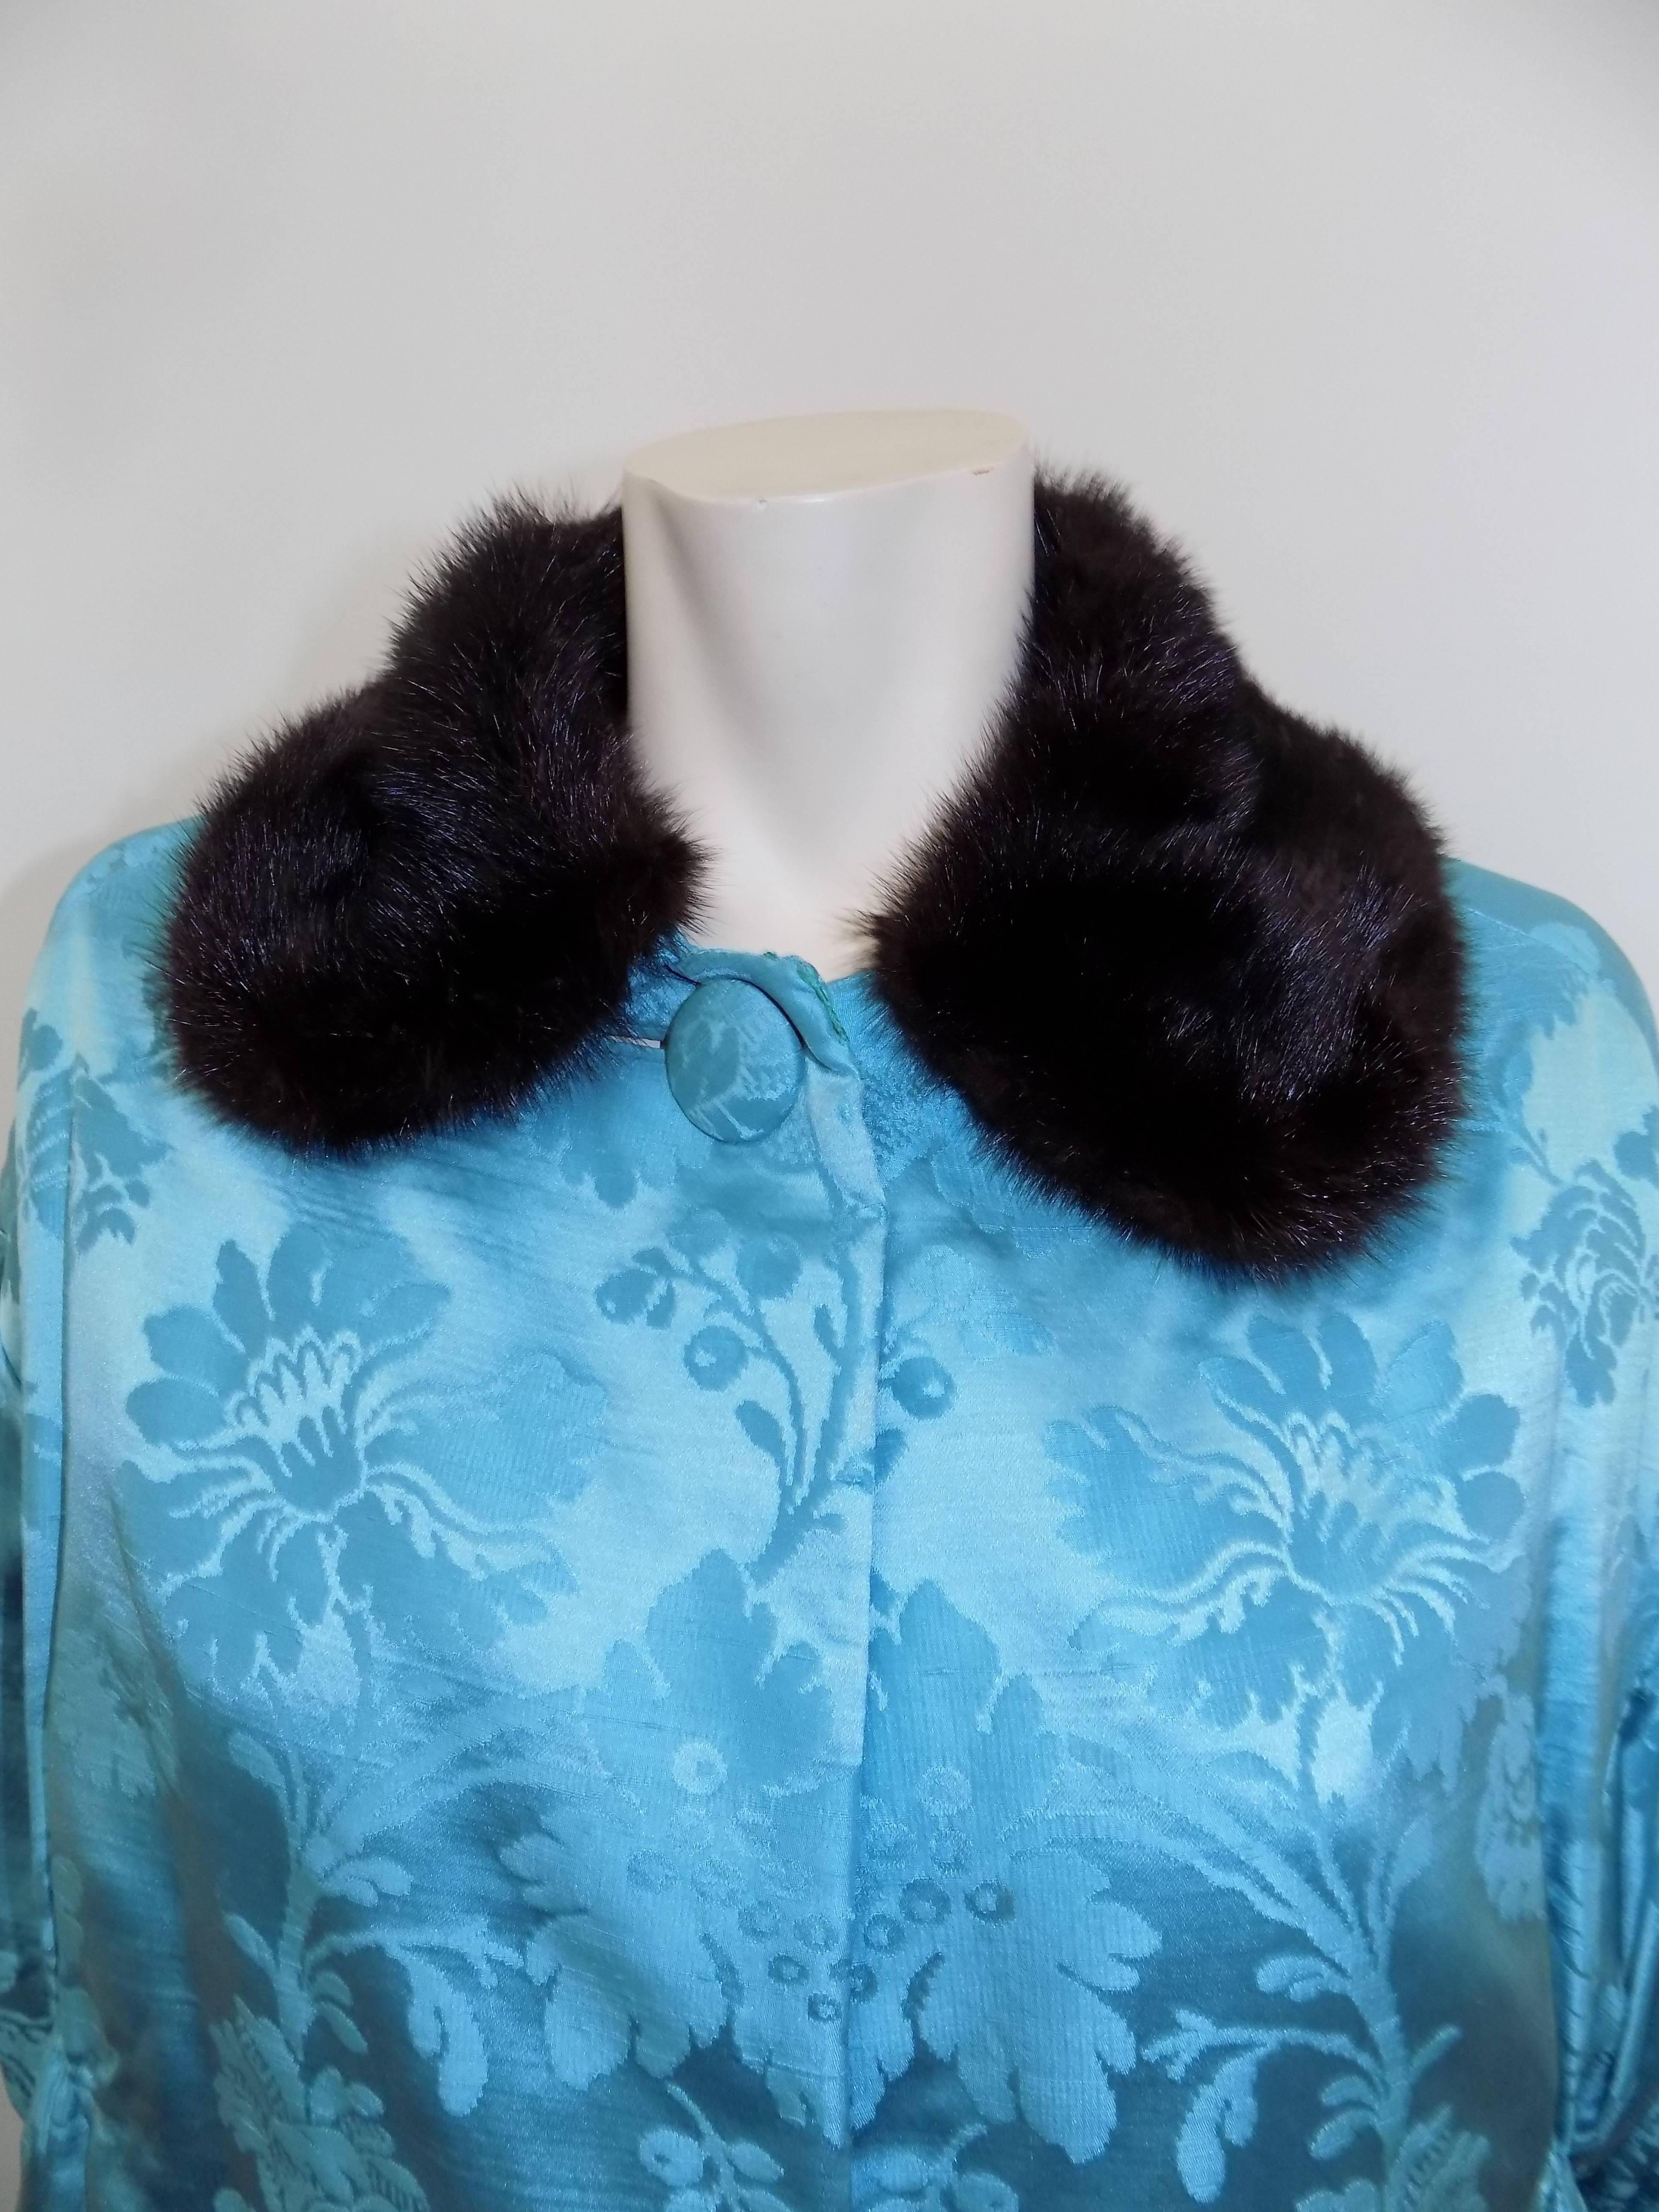 Jeanne Lanvin silk Mink fur trimmed Haute couture Coat 1950's In Excellent Condition For Sale In New York, NY